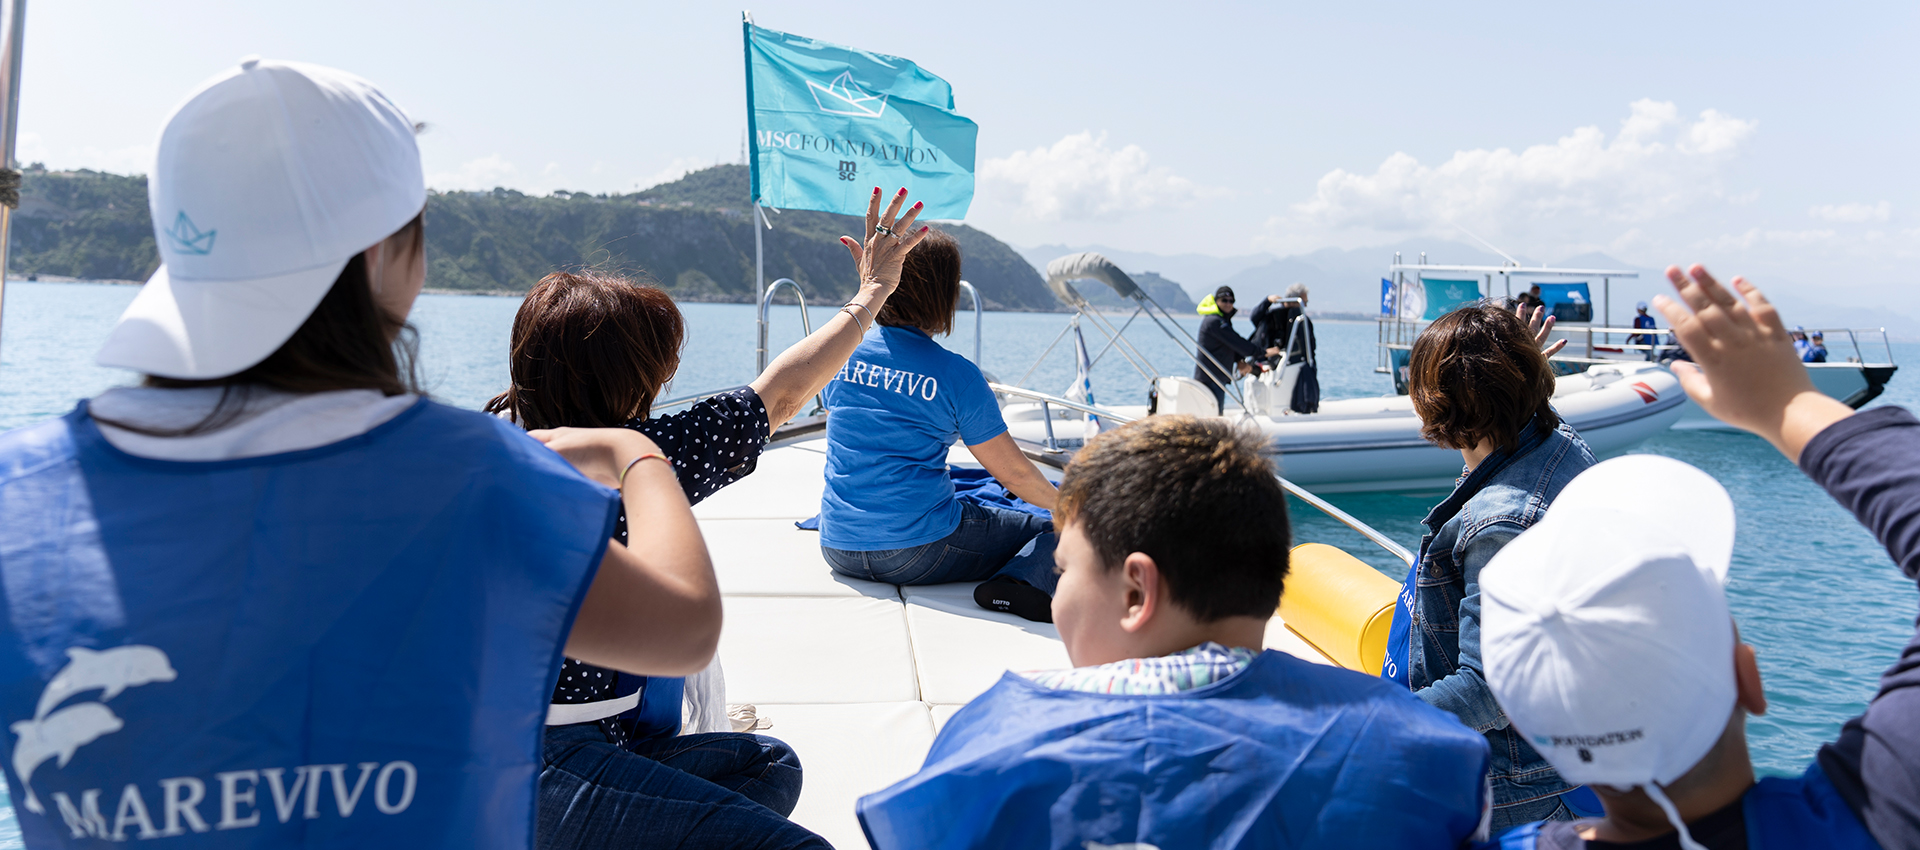 Marevivo's Guardian Dolphins Programme Goes Out to Italy’s Islands for its Tenth Year  | MSC Foundation